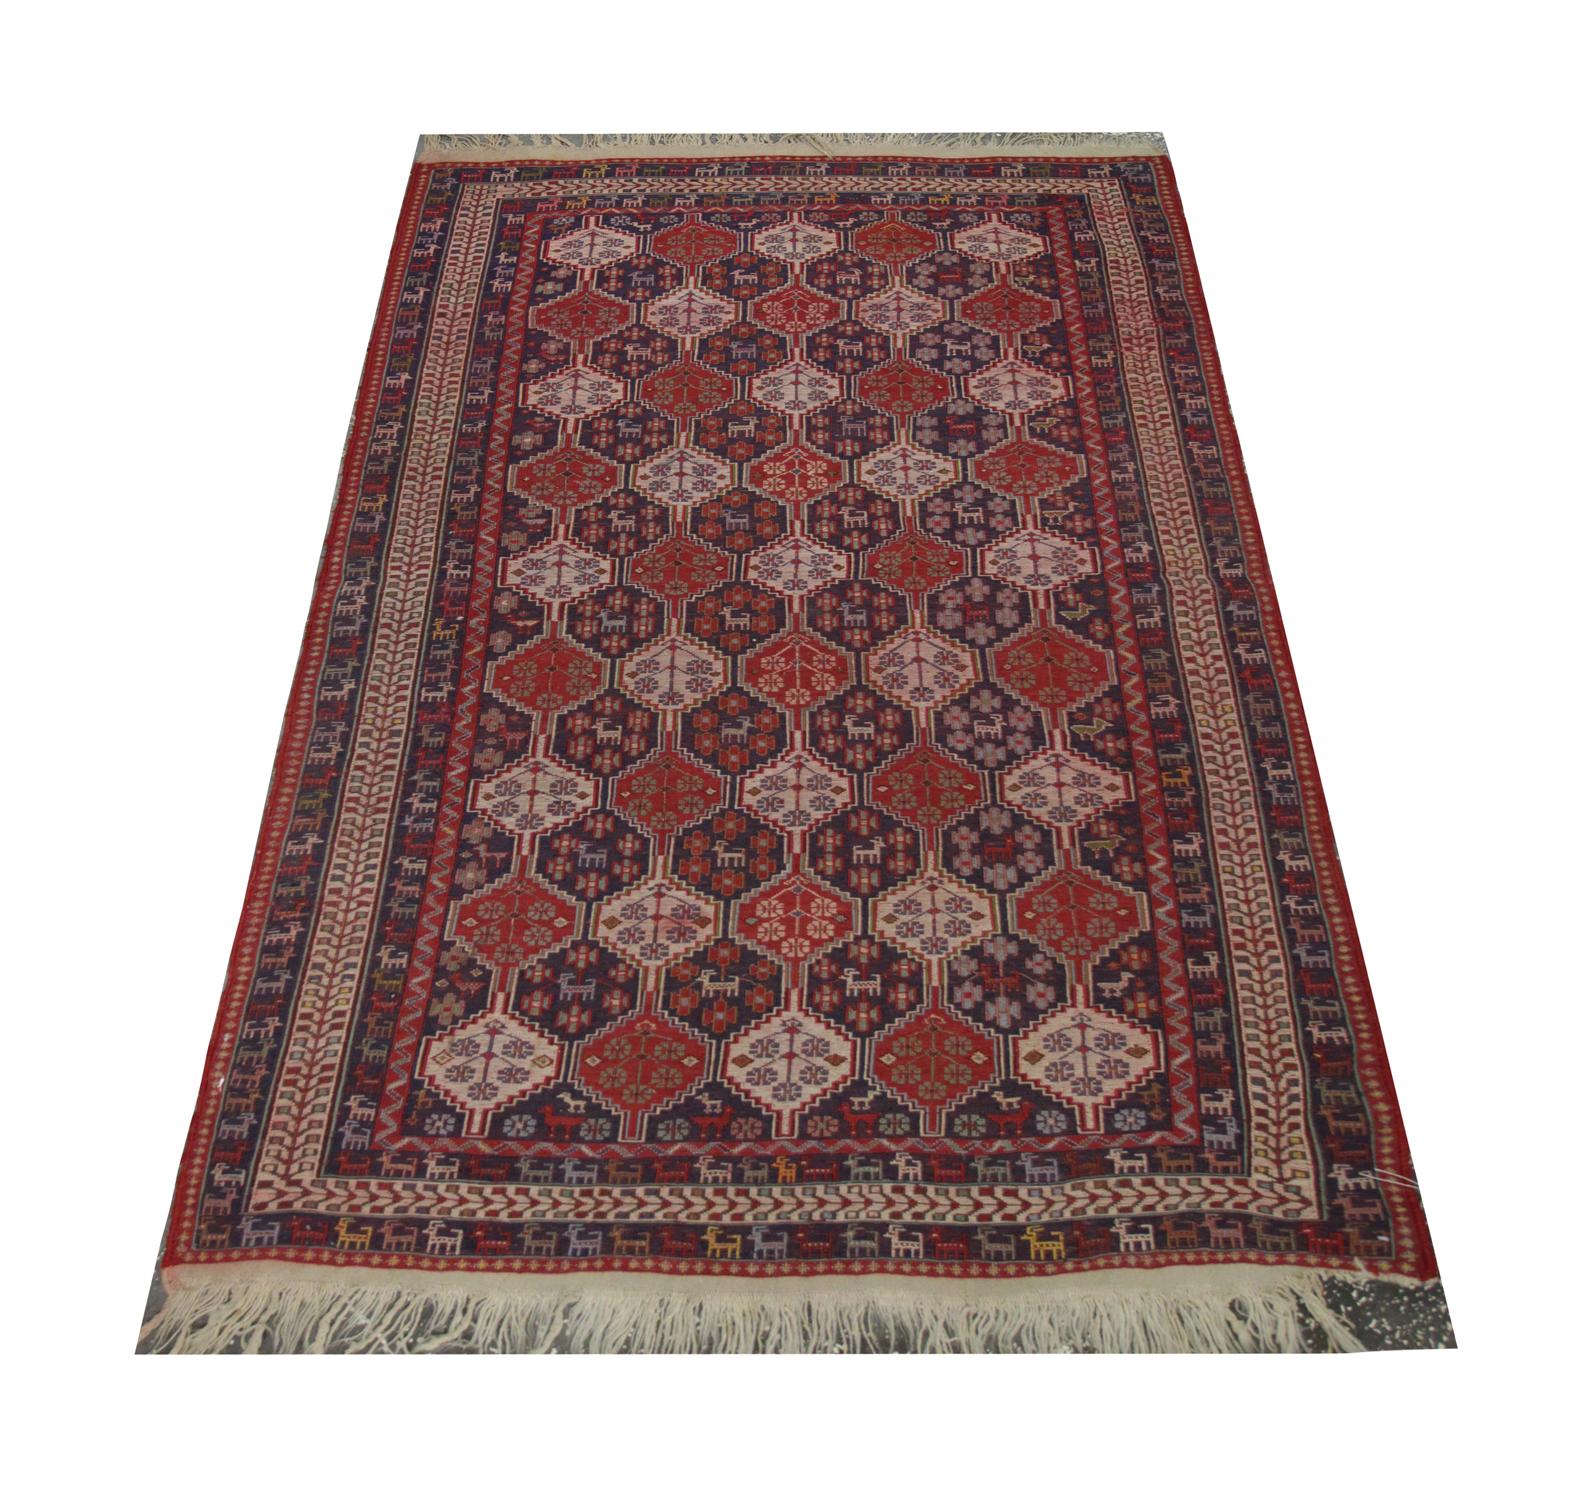 This fine wool rug is an excellent example of oriental Geometric Floral motifs that decorate the central design of this Sumakh kilim, delicately woven in a repeating pattern with bold colours including red, blue, ivory and green. This is then framed